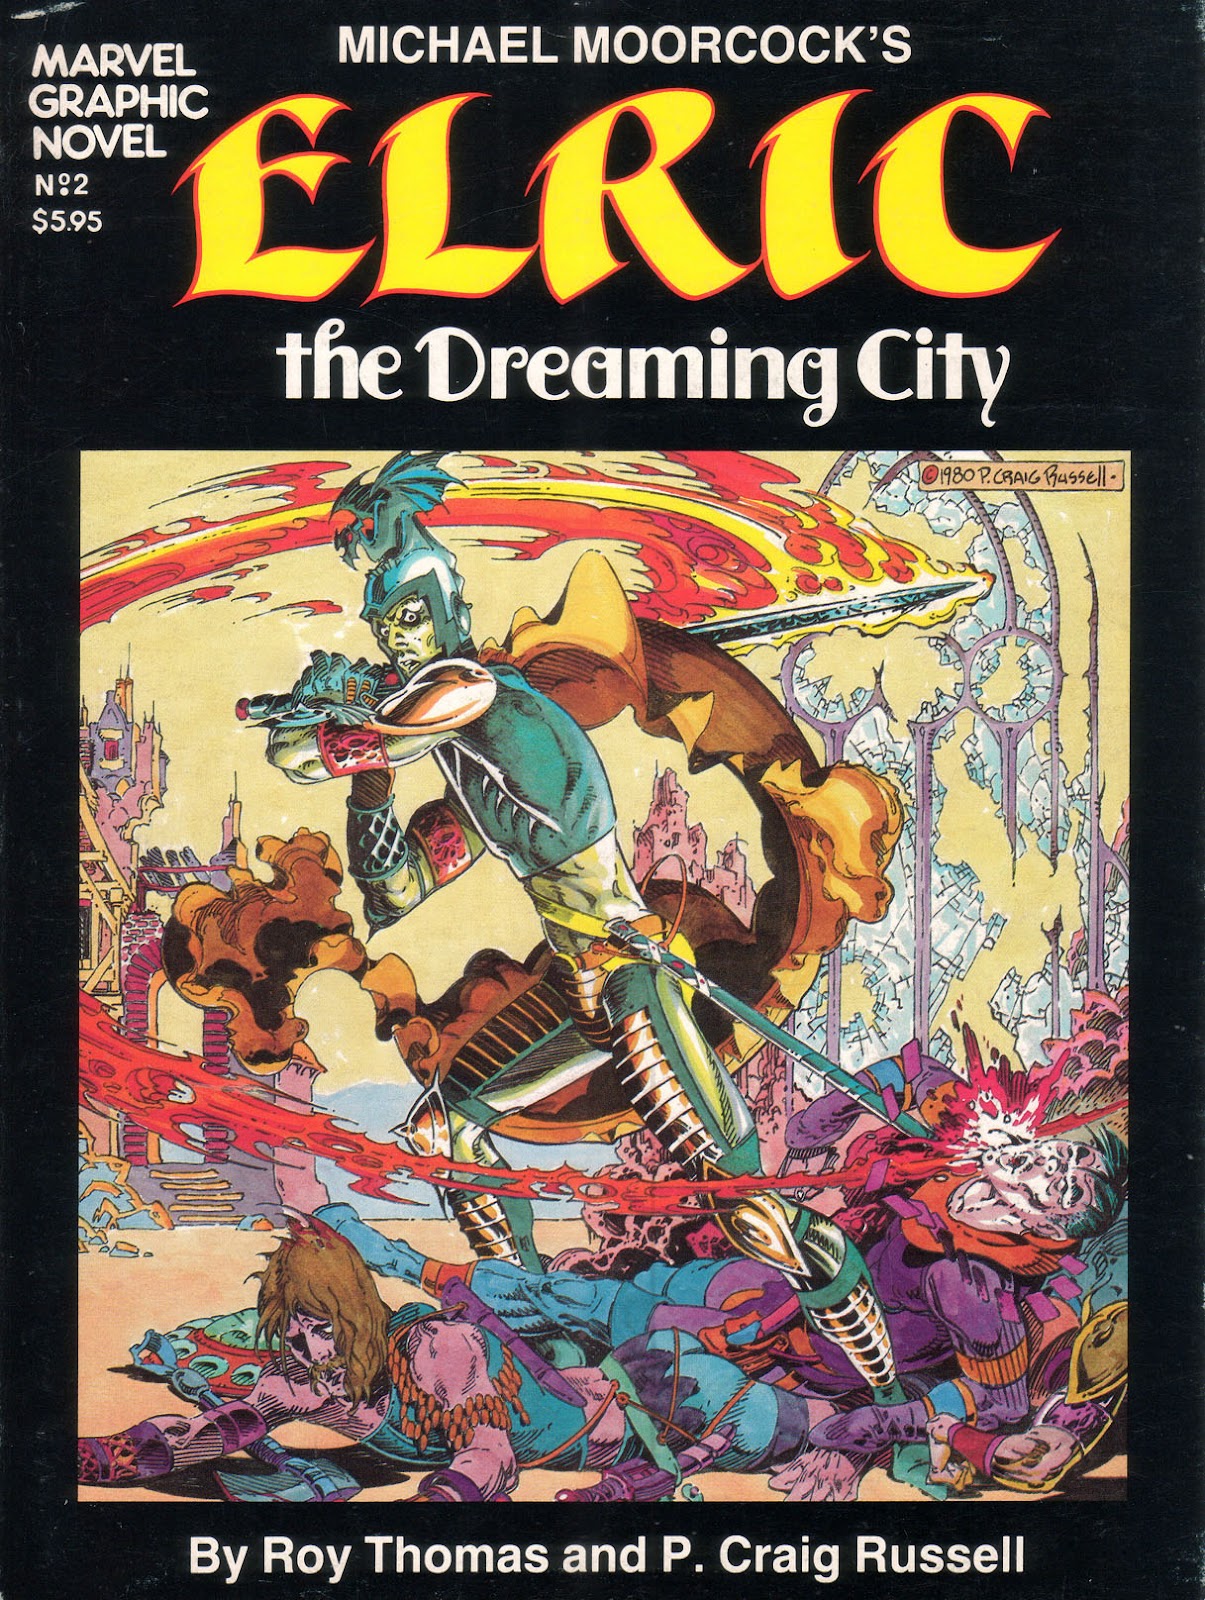 Marvel Graphic Novel 2 - Elric - The Dreaming City Page 1